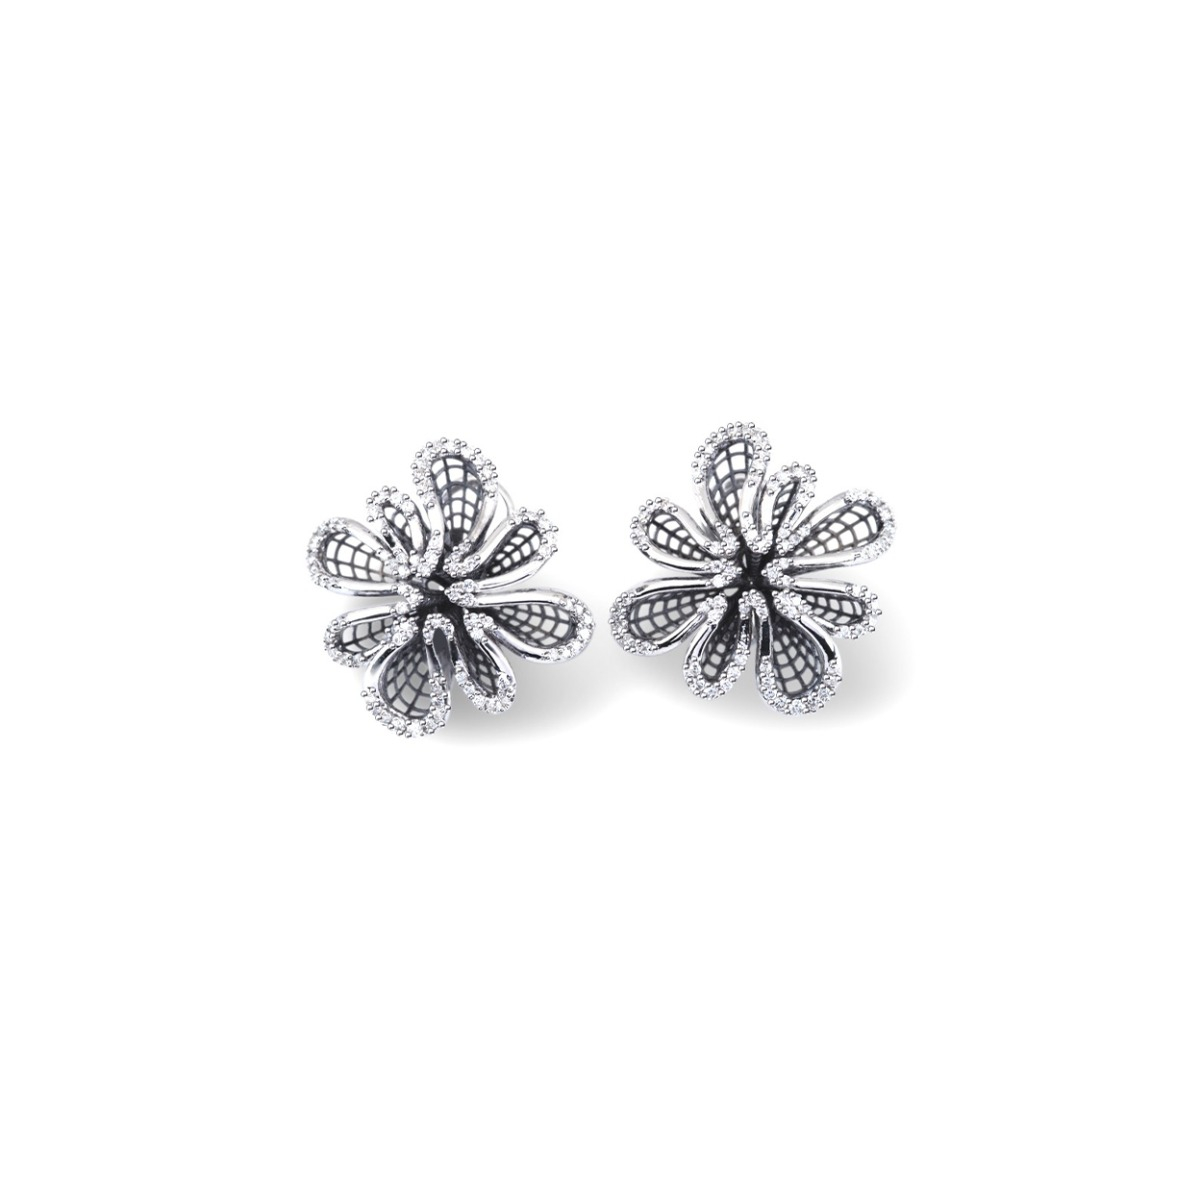 White Gold Wavy Stud Earrings with Diamonds